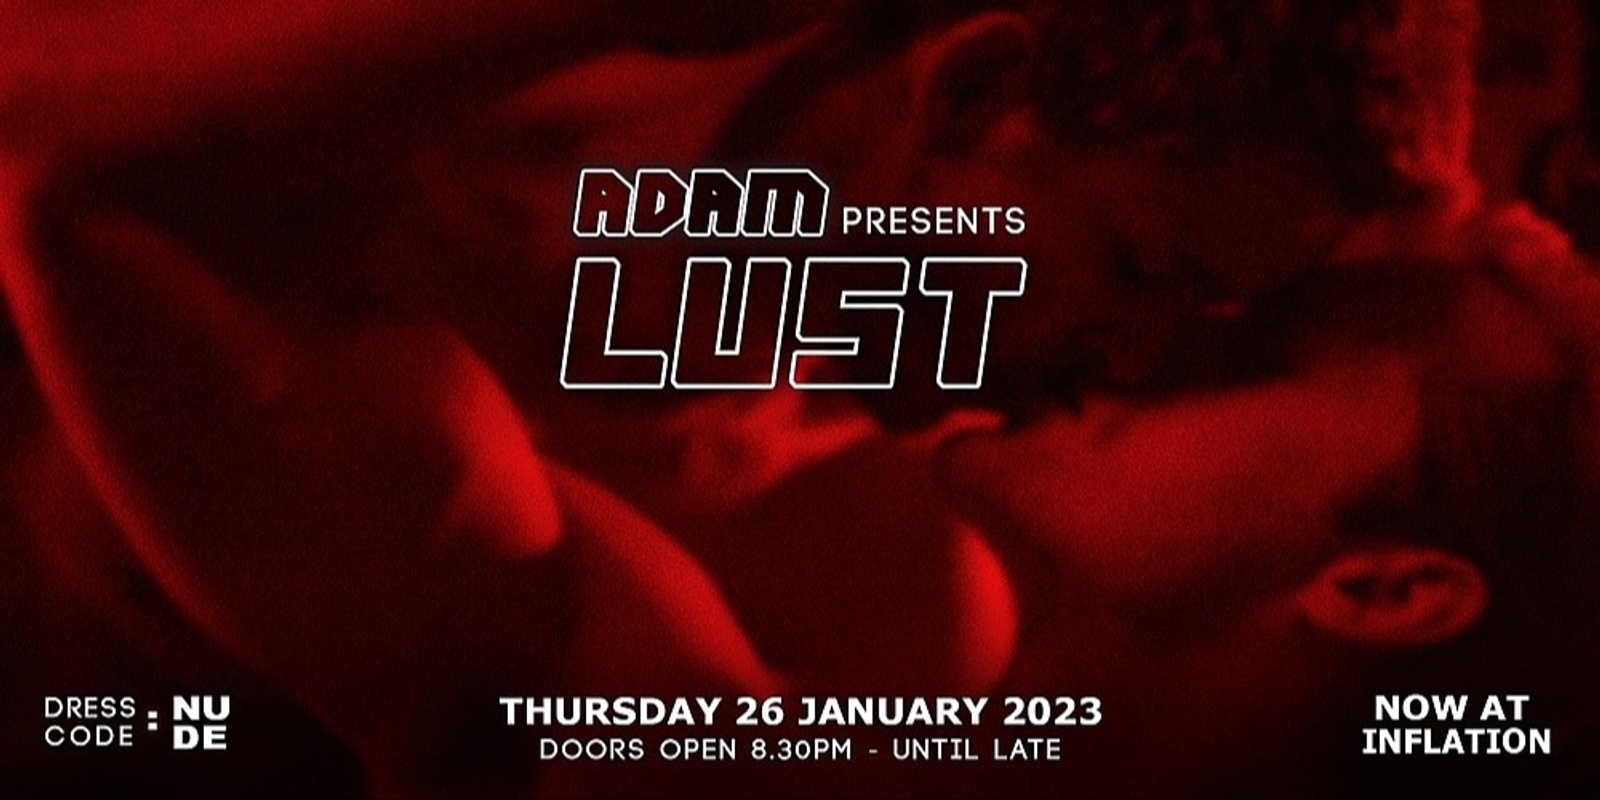 Banner image for LUST at Inflation Thursday 26 January 2023